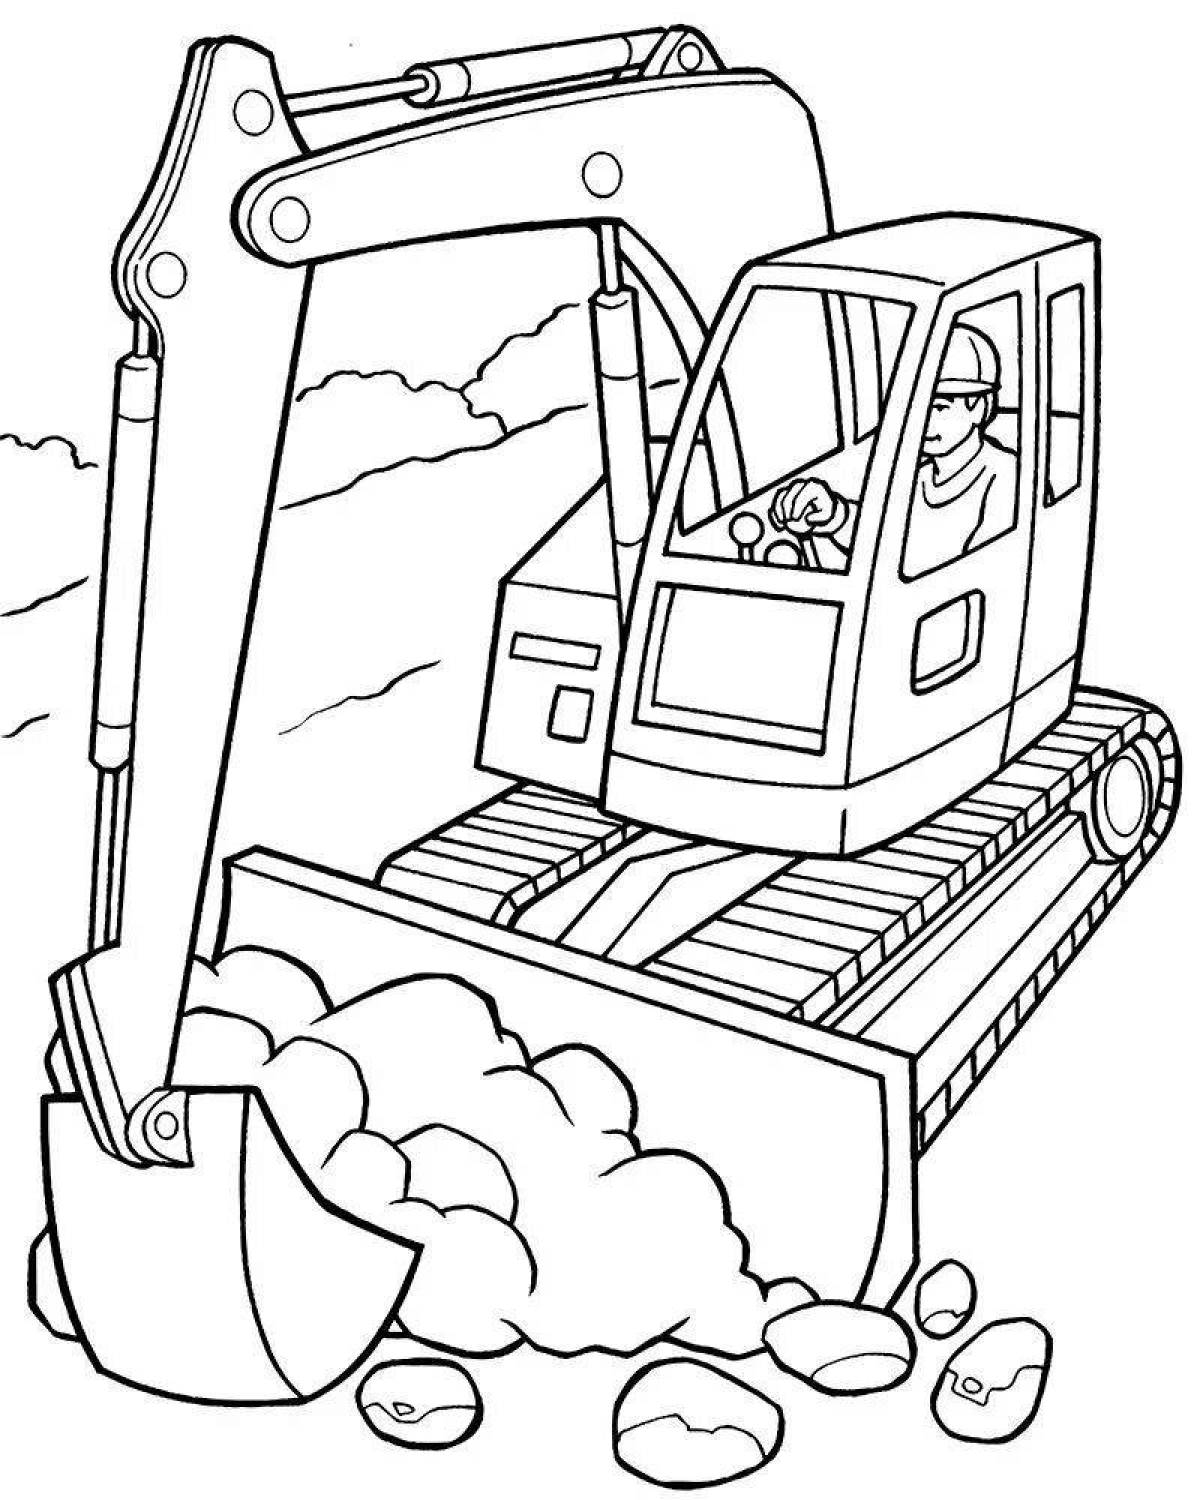 Amazing construction machinery coloring page for kids